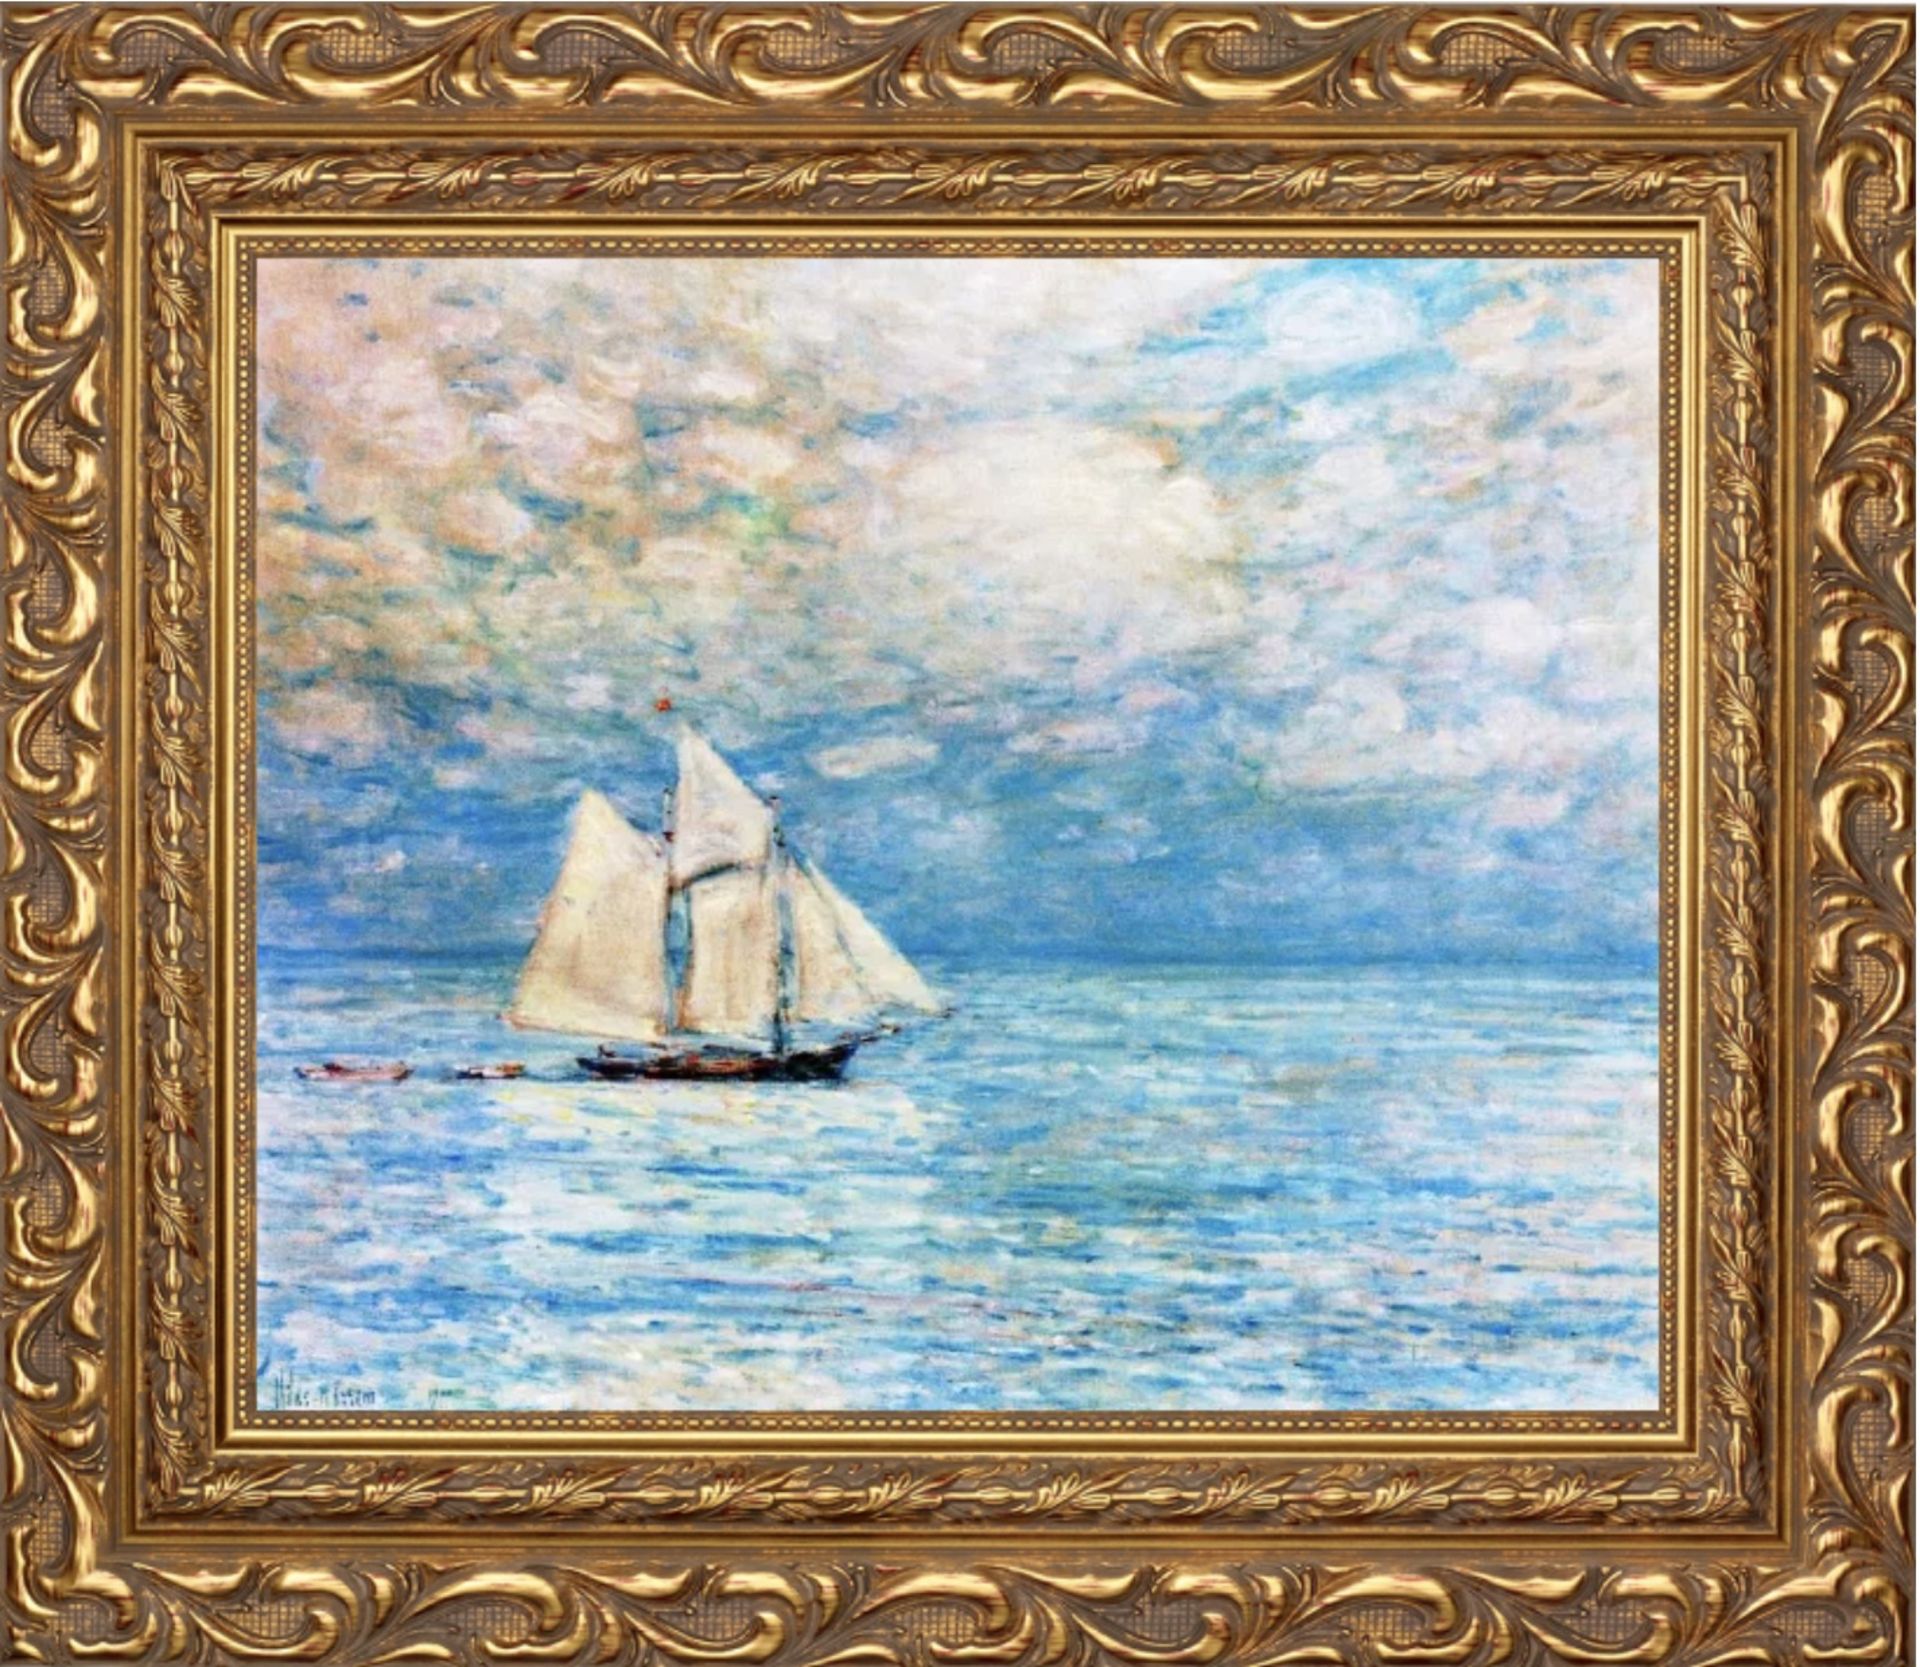 Frederick Childe Hassam "Sailing on Calm Seas, Gloucester Harbor" Oil Painting